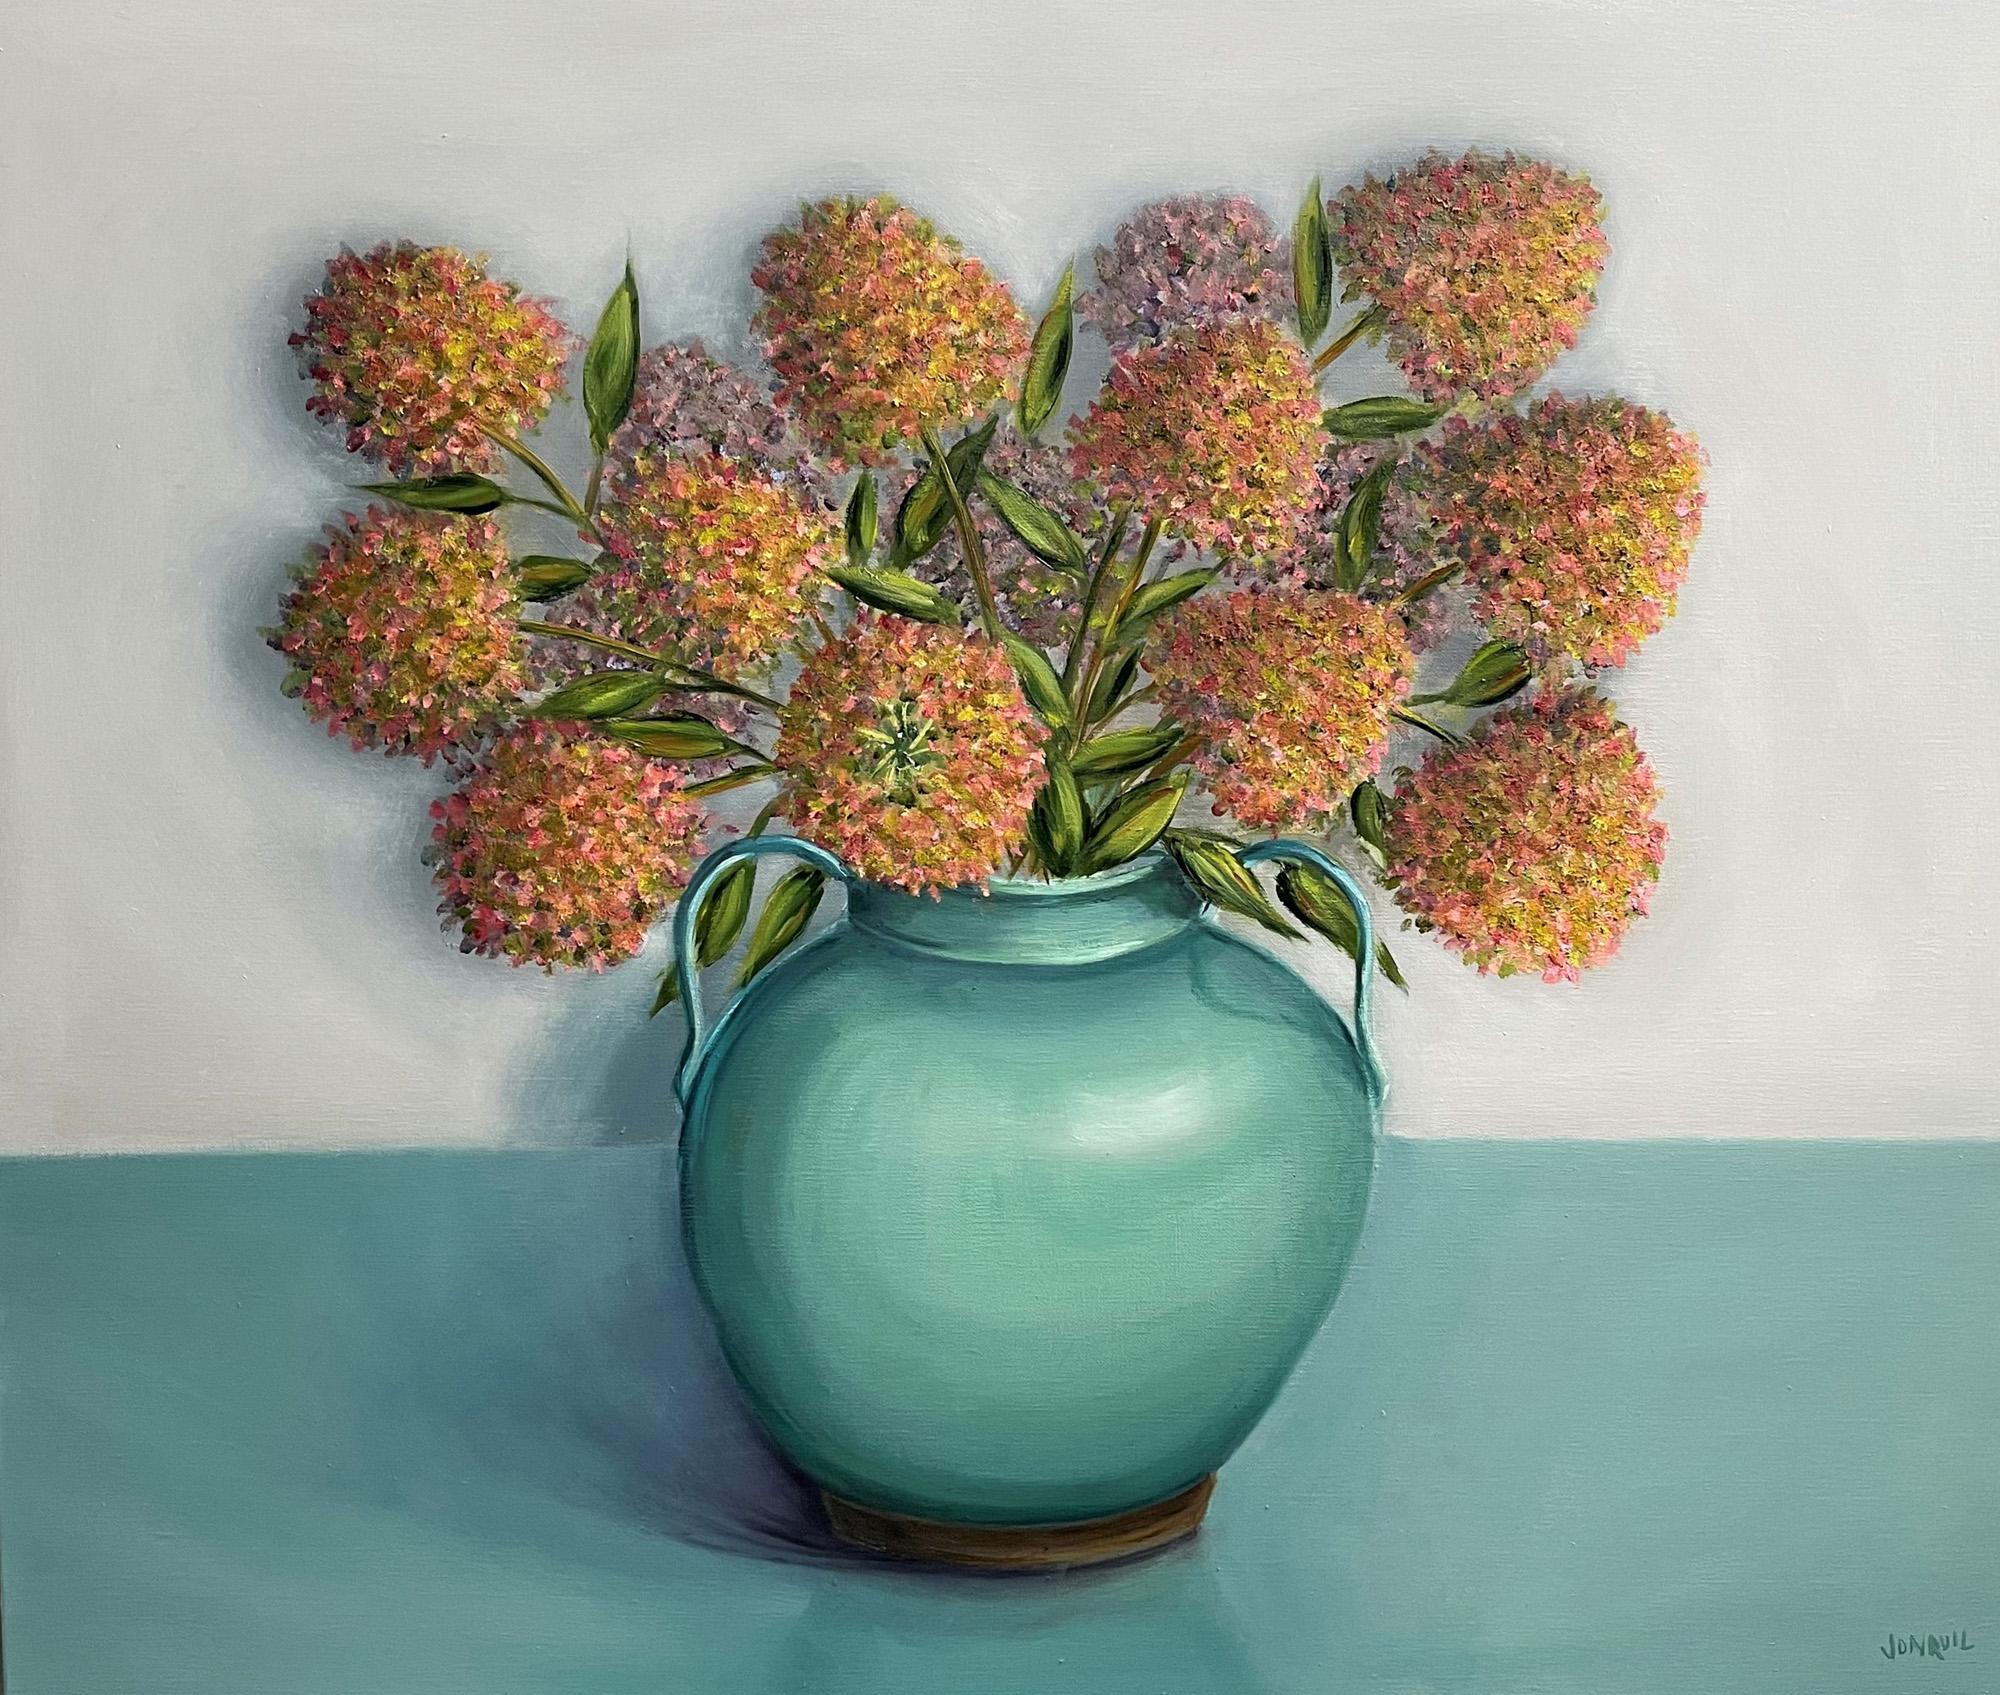 Jonquil Williamson is known for her vibrant still lifes and rich tonal landscapes. Although her work is mostly representational, she allows the mark-making and textures created as she layers the paint, to inform the image.

Of her work she shares,